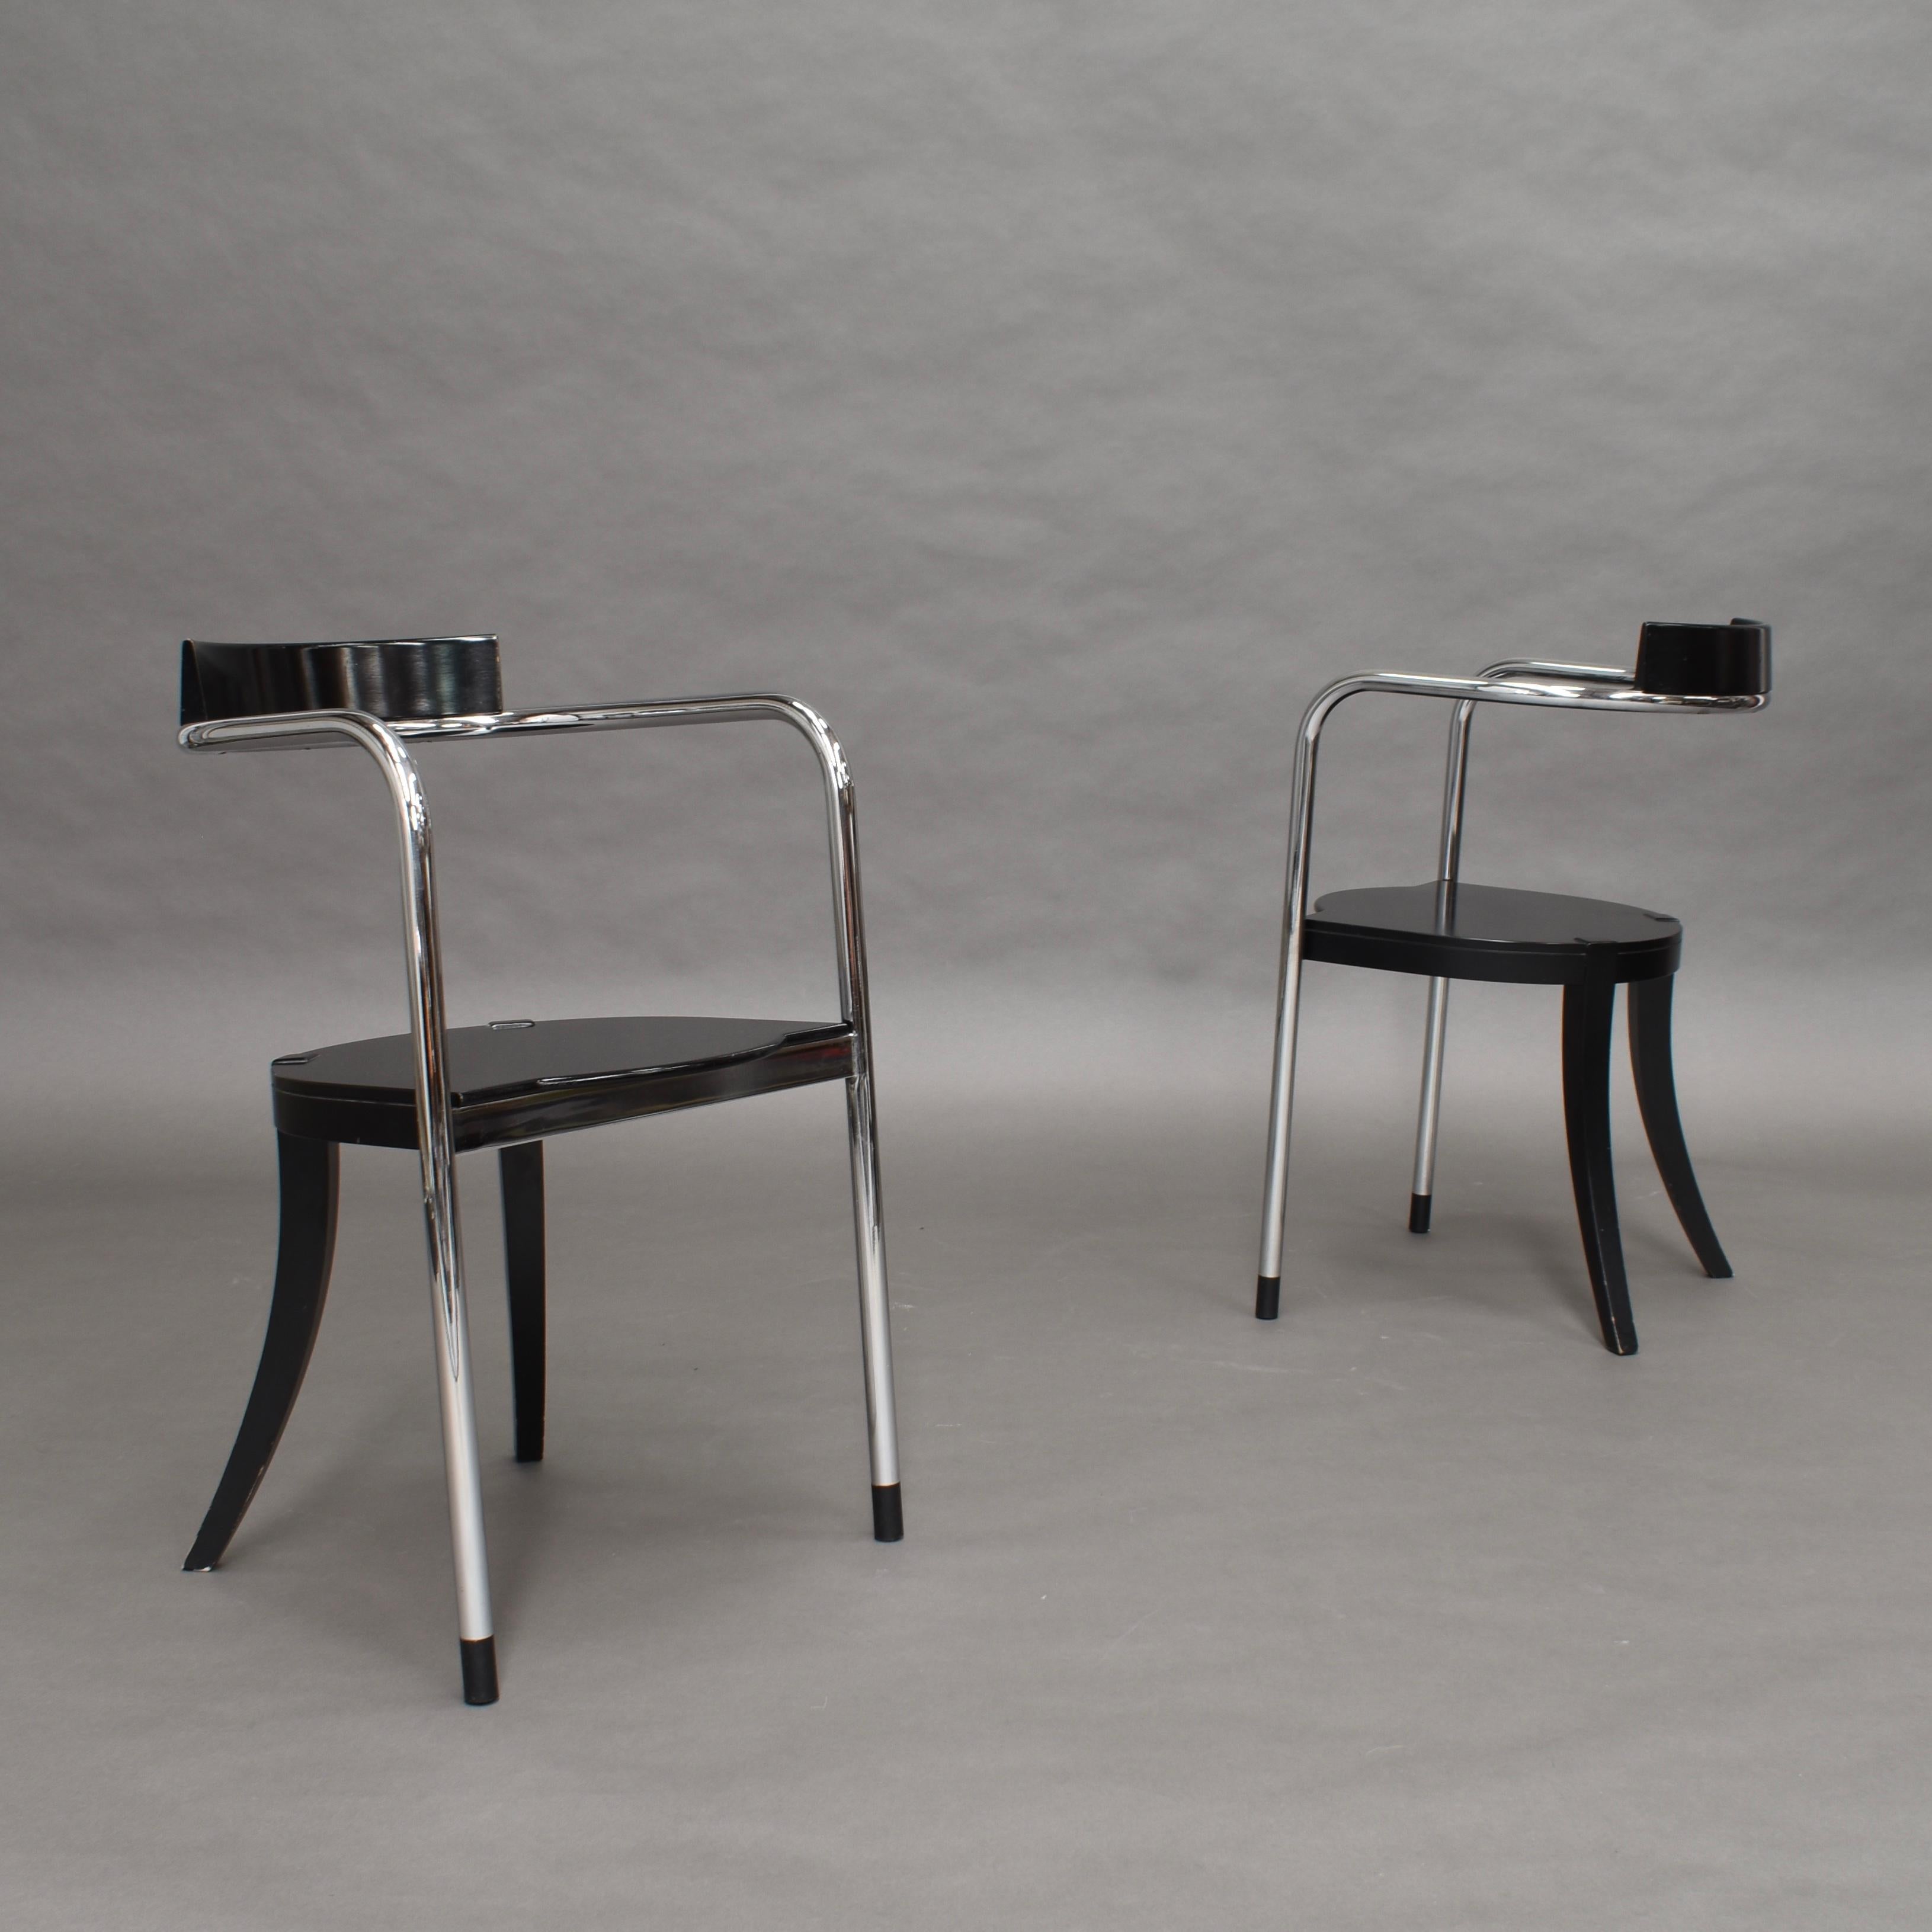 Pair of Chrome Dining Armchairs by David Palterer for Zanotta, Italy, 1987 In Good Condition For Sale In Pijnacker, Zuid-Holland